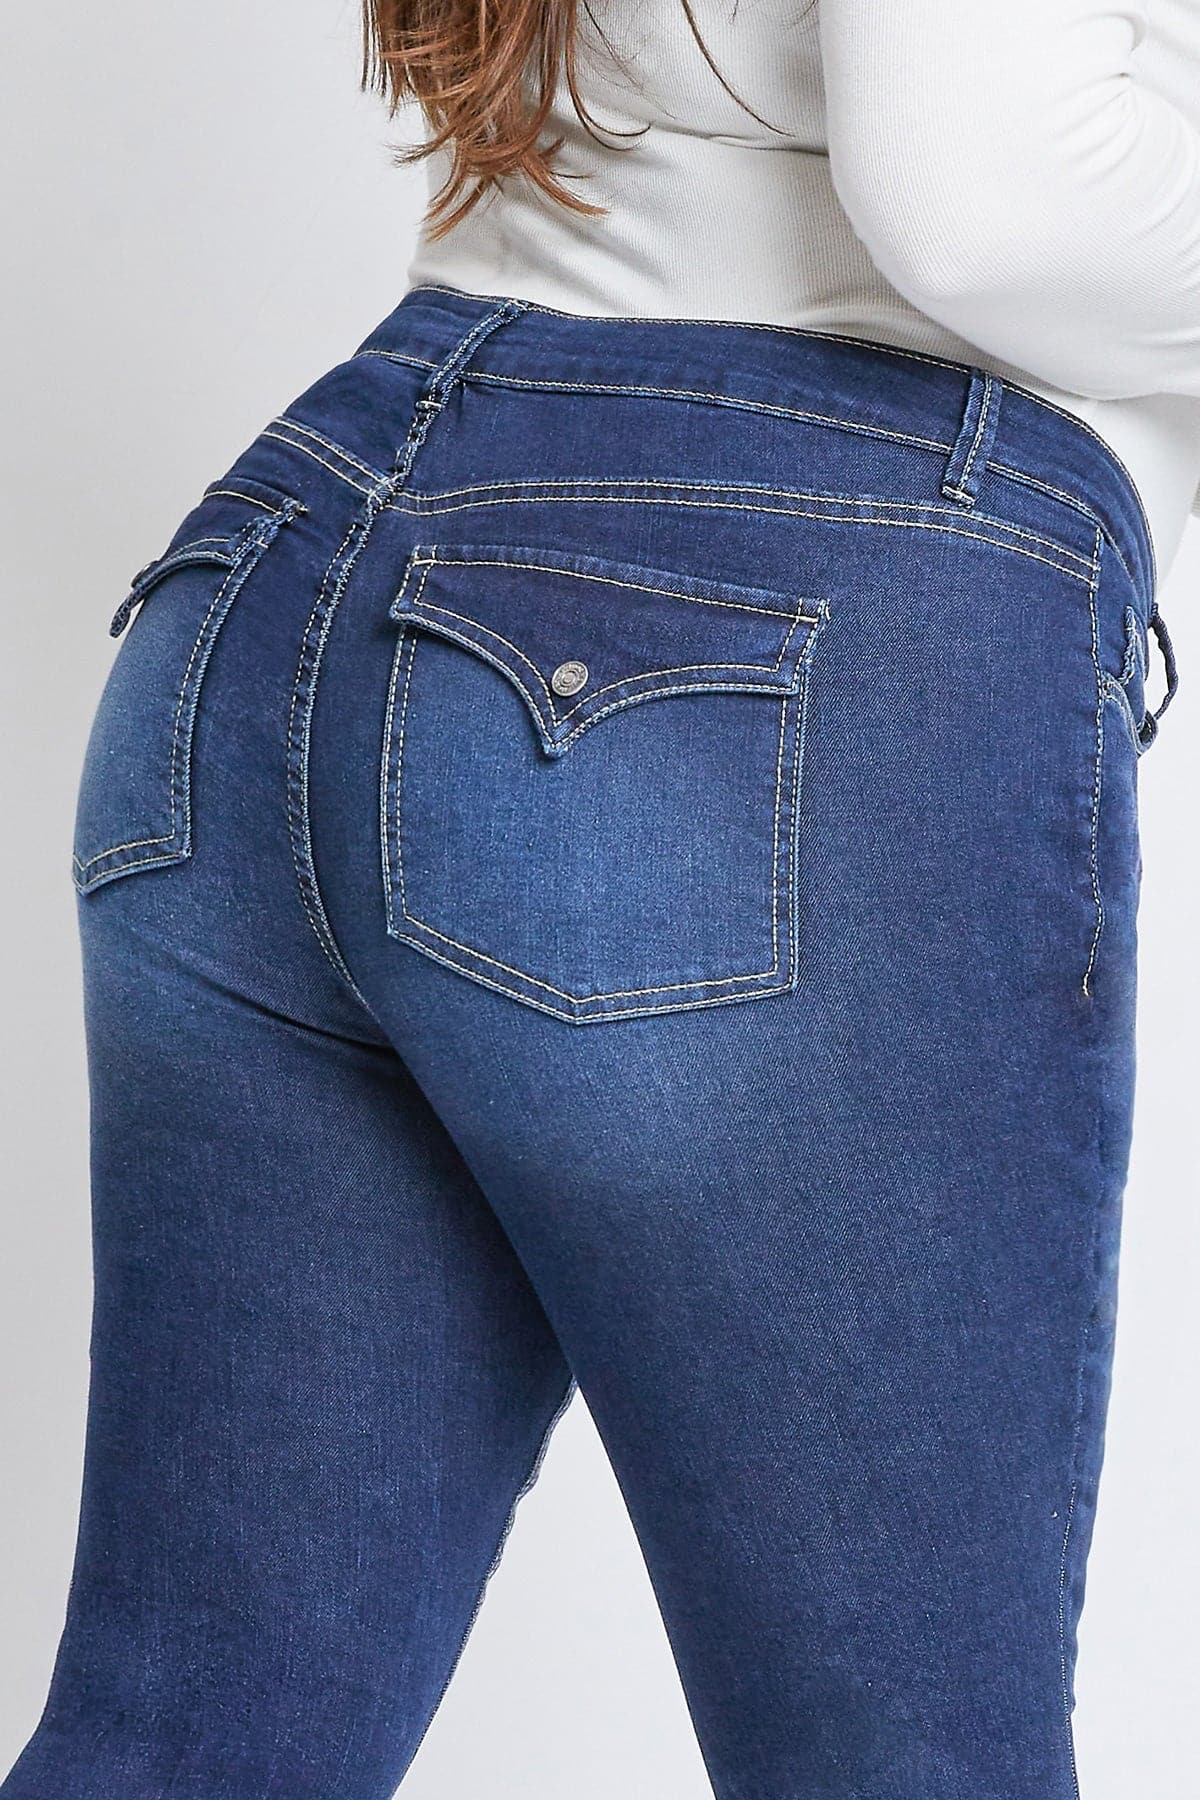 Women¨s Plus Sustainable Mid-Rise Bootcut Jean